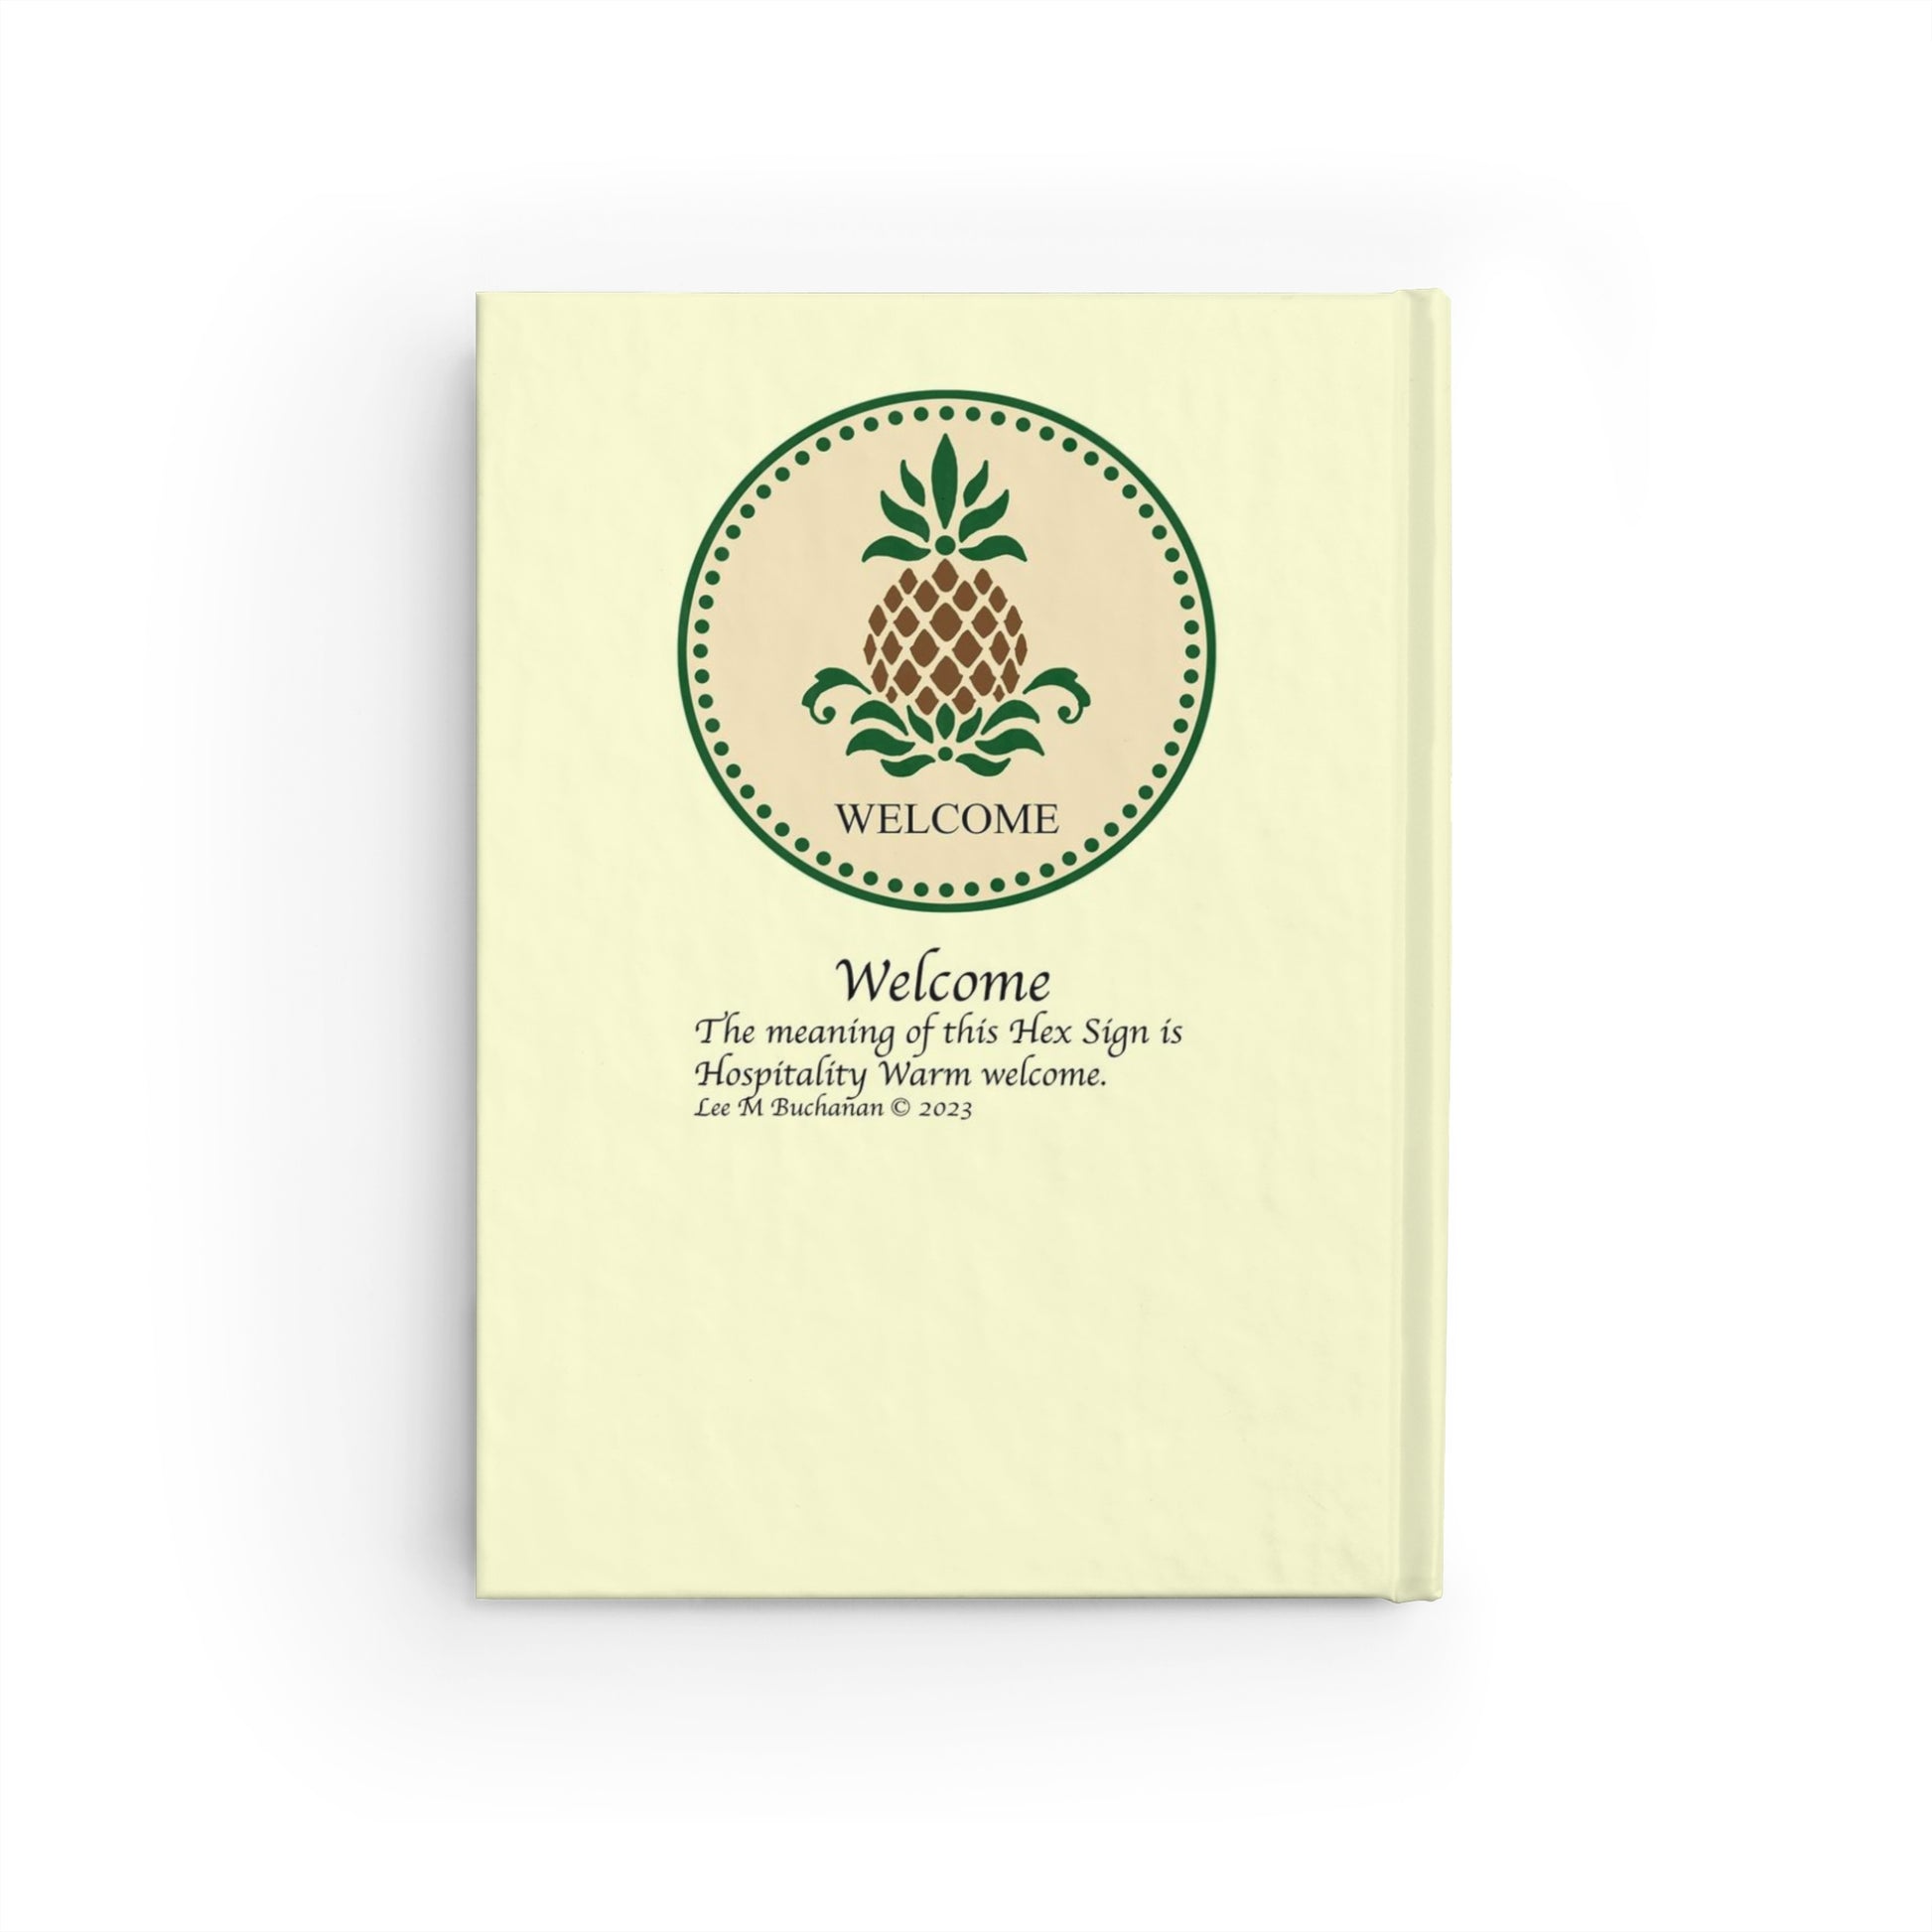 The Welcome Folk Art Design Ruled Line Journal features a reproduction of a creative art design by artist Lee M. Buchanan. The Pineapple has long been a symbol of welcome and hospitality. Use your Welcome Folk Art Design Journal to make plans for entertaining friends, family and special guests, or use it as a record of all guests who visit your home and enjoy your unique and special  welcoming hospitality. 